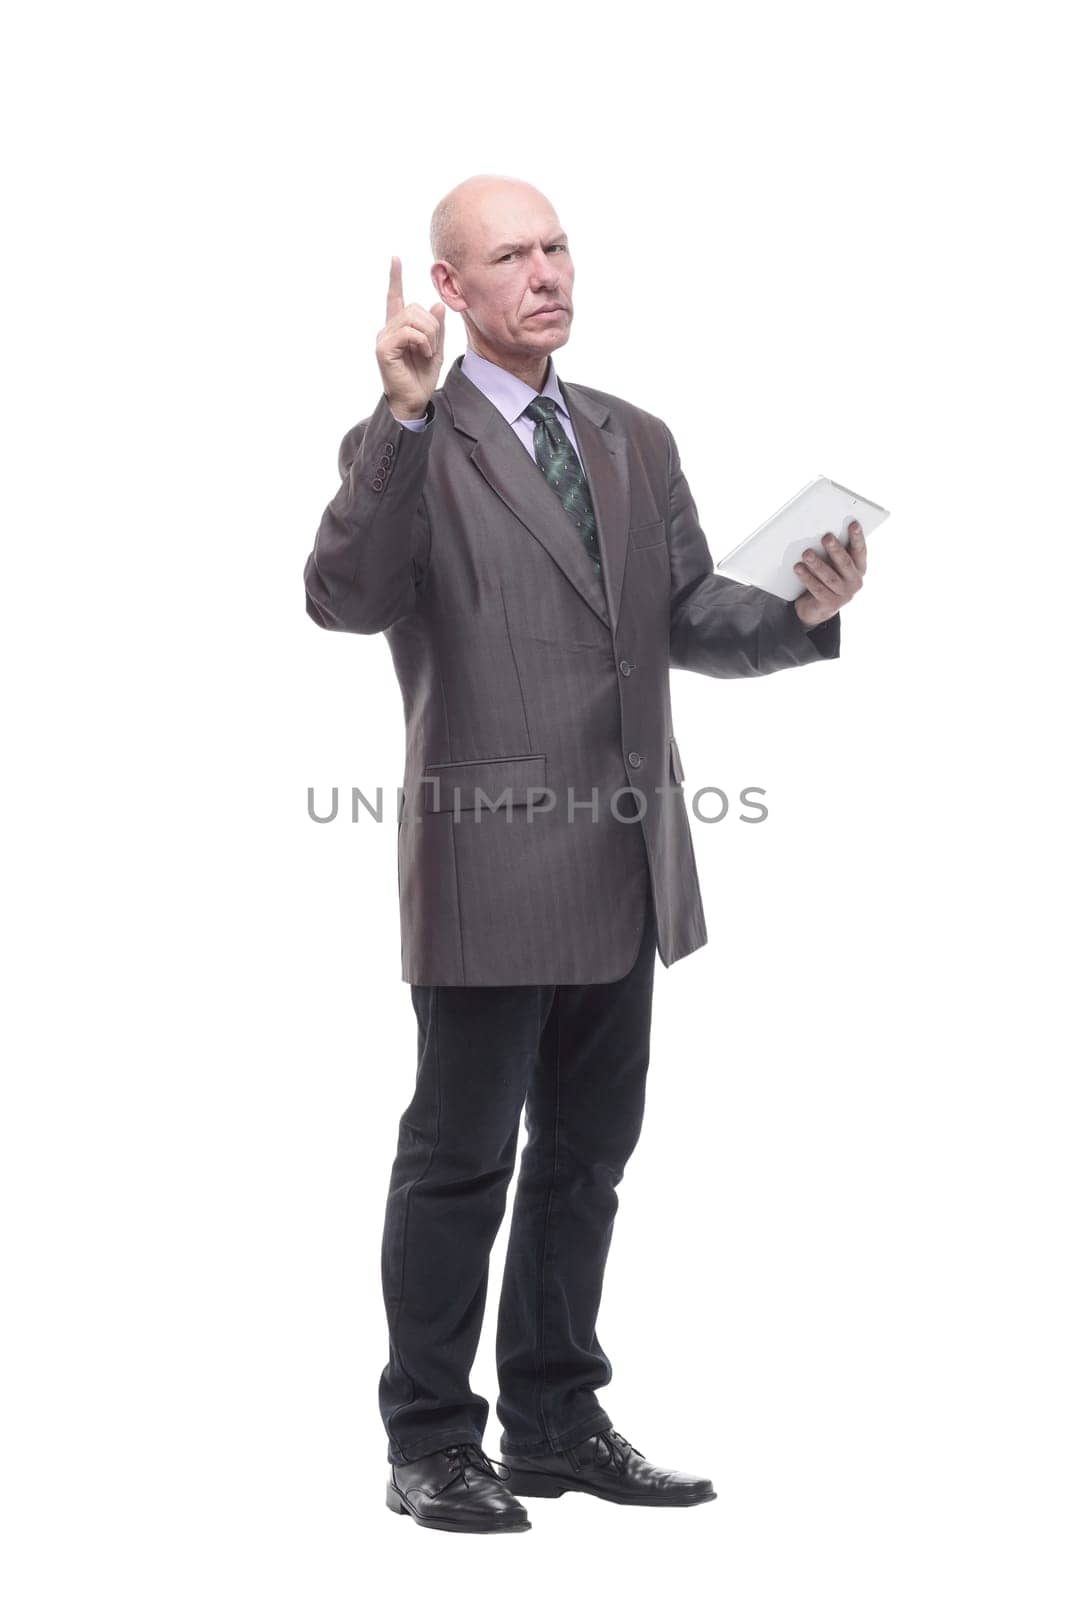 smiling business man with a digital tablet. isolated on a white background.